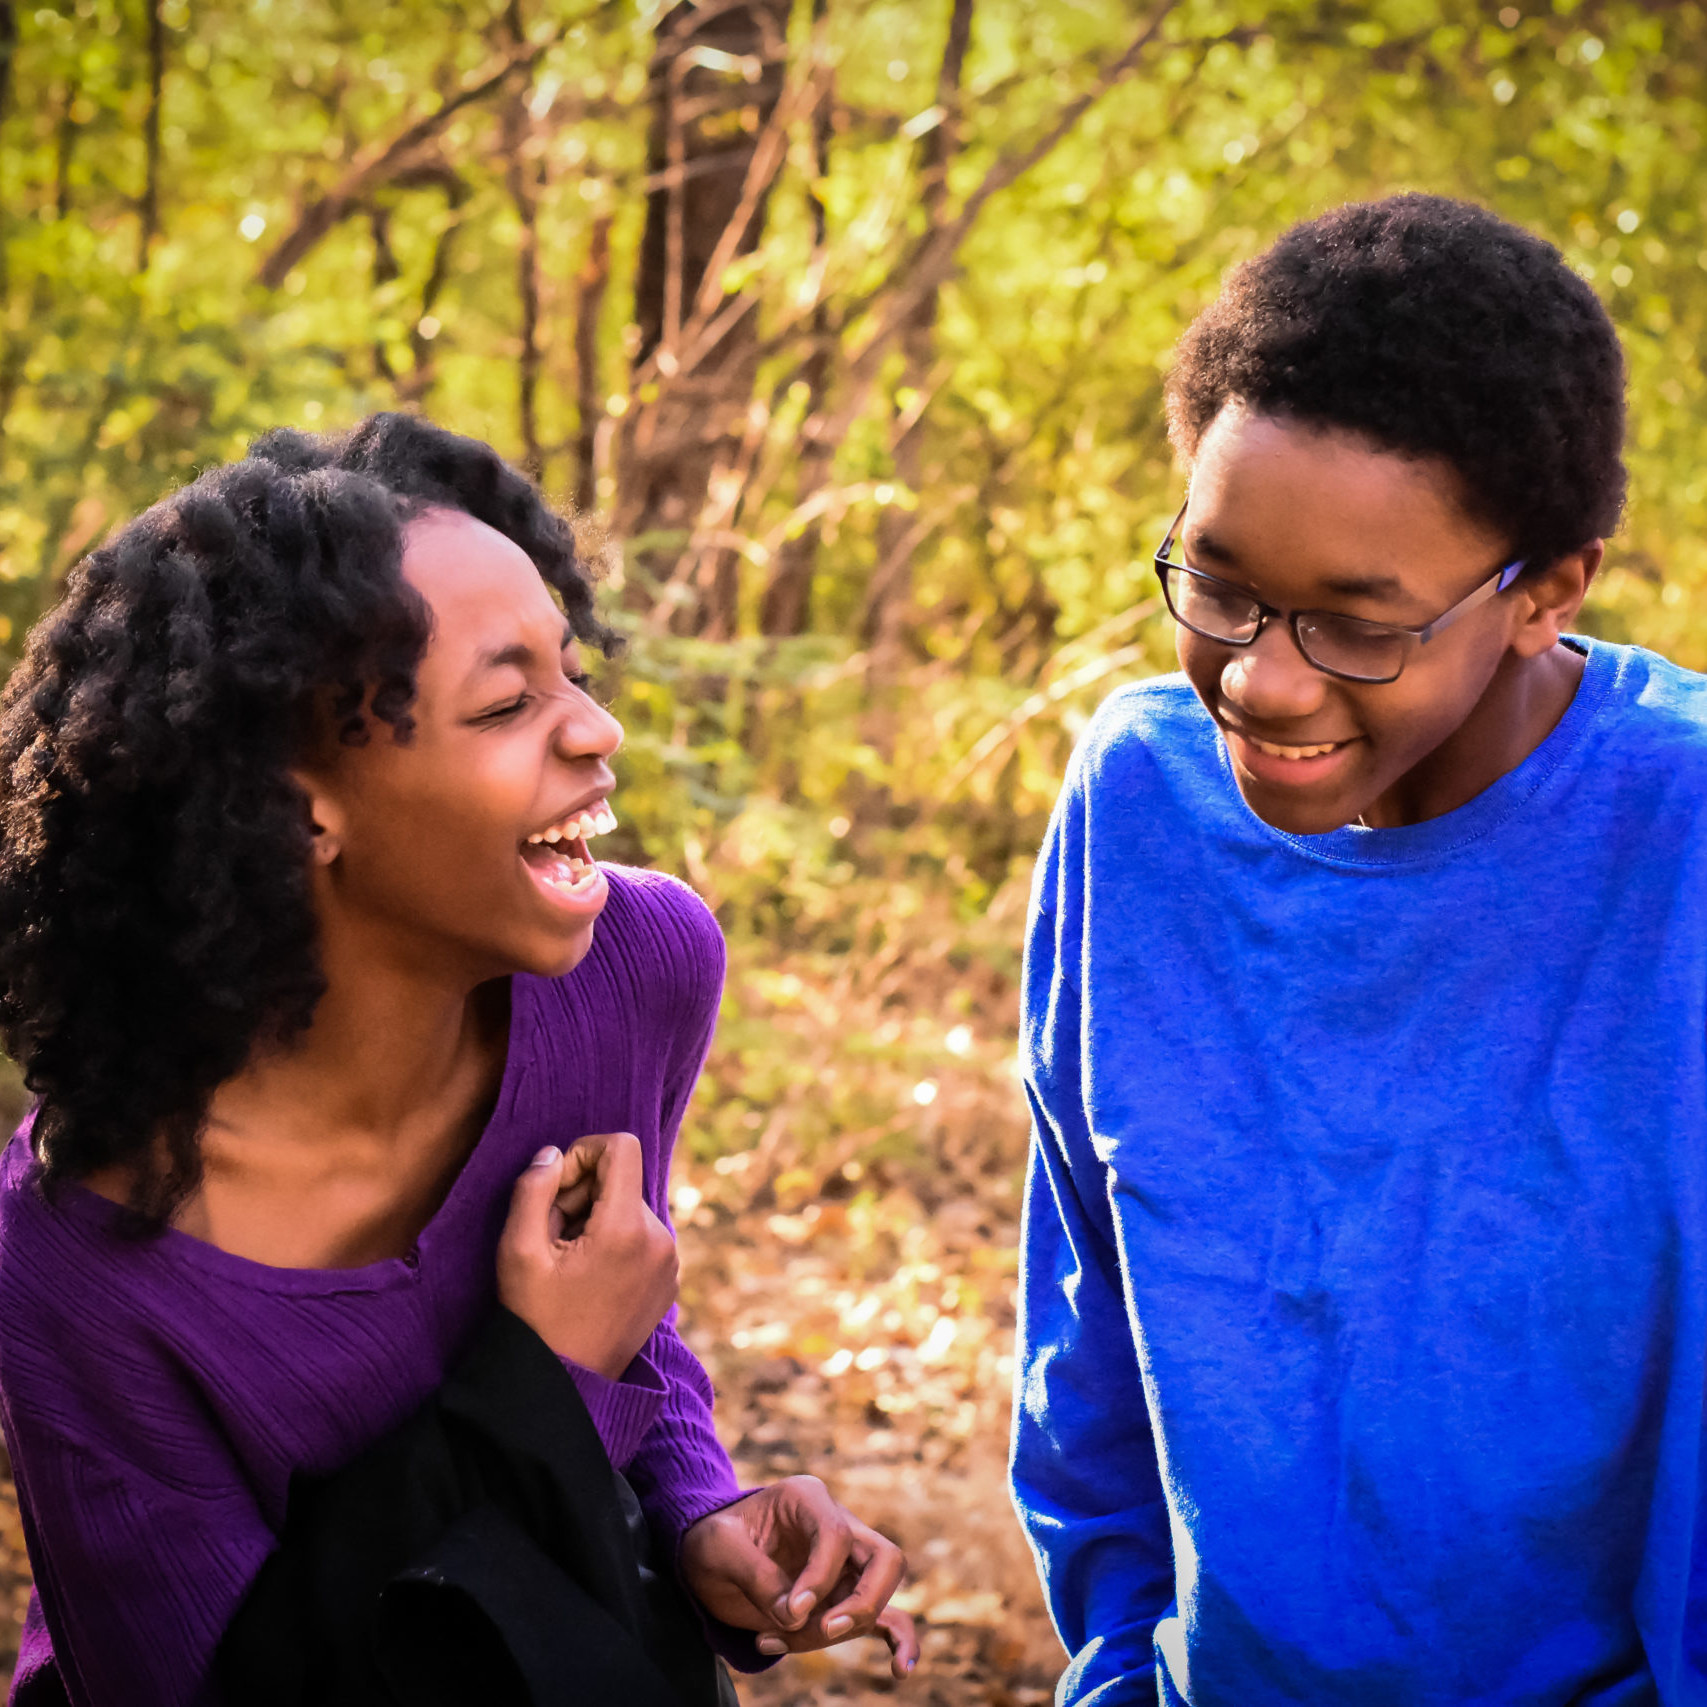 Two siblings walk in the forest and laugh hard. Sister on the left faces brother on the right with an open mouth grin.